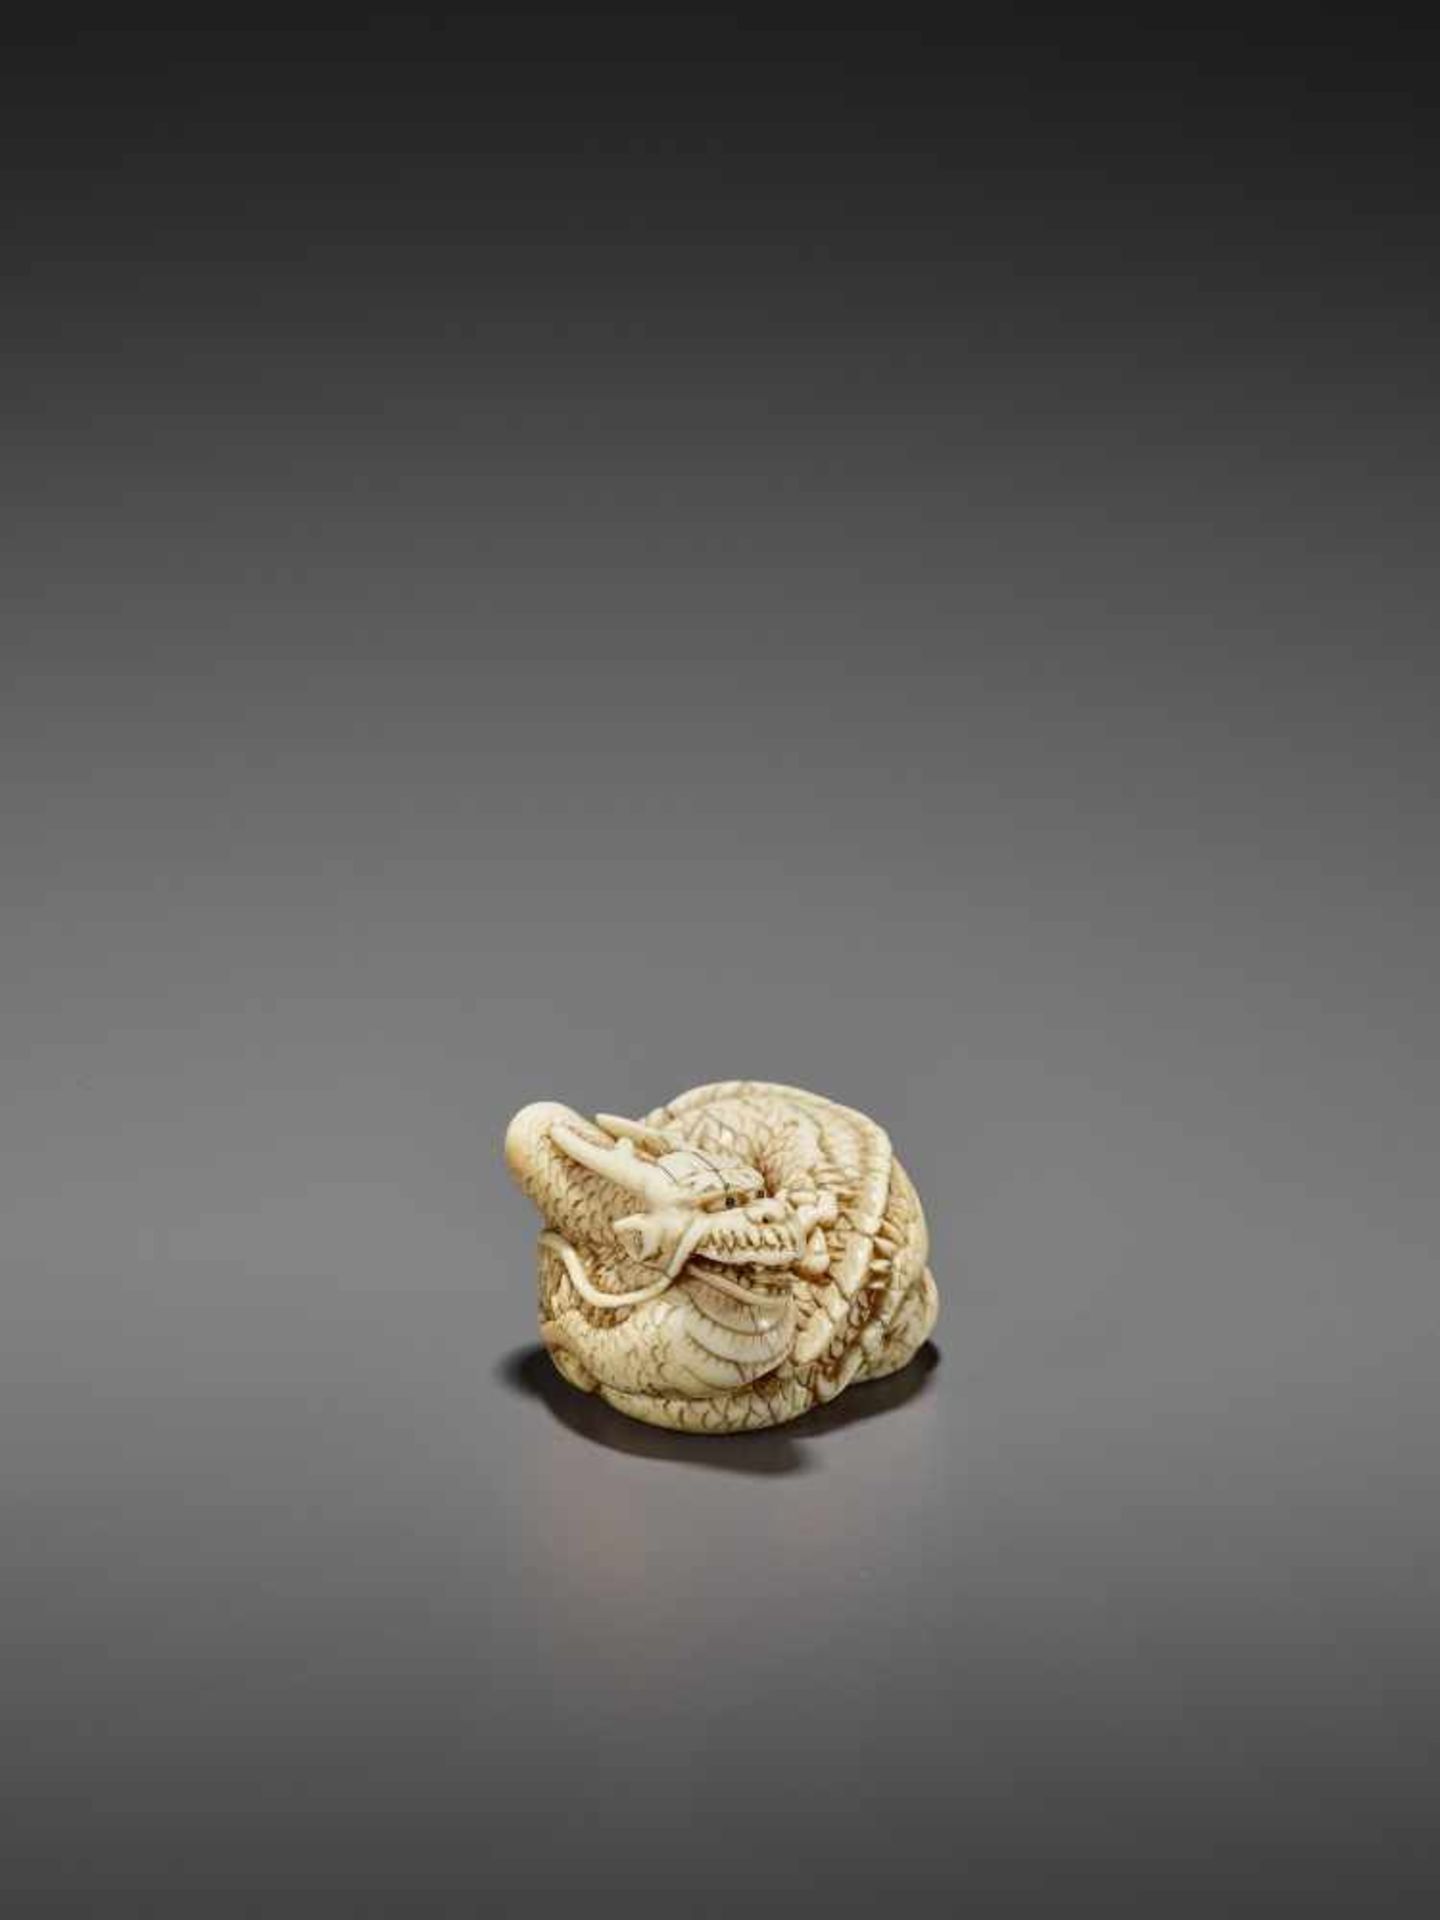 A GOOD IVORY NETSUKE OF A COILED DRAGON UnsignedJapan, Kyoto, late 18th to early 19th century, Edo - Image 8 of 10